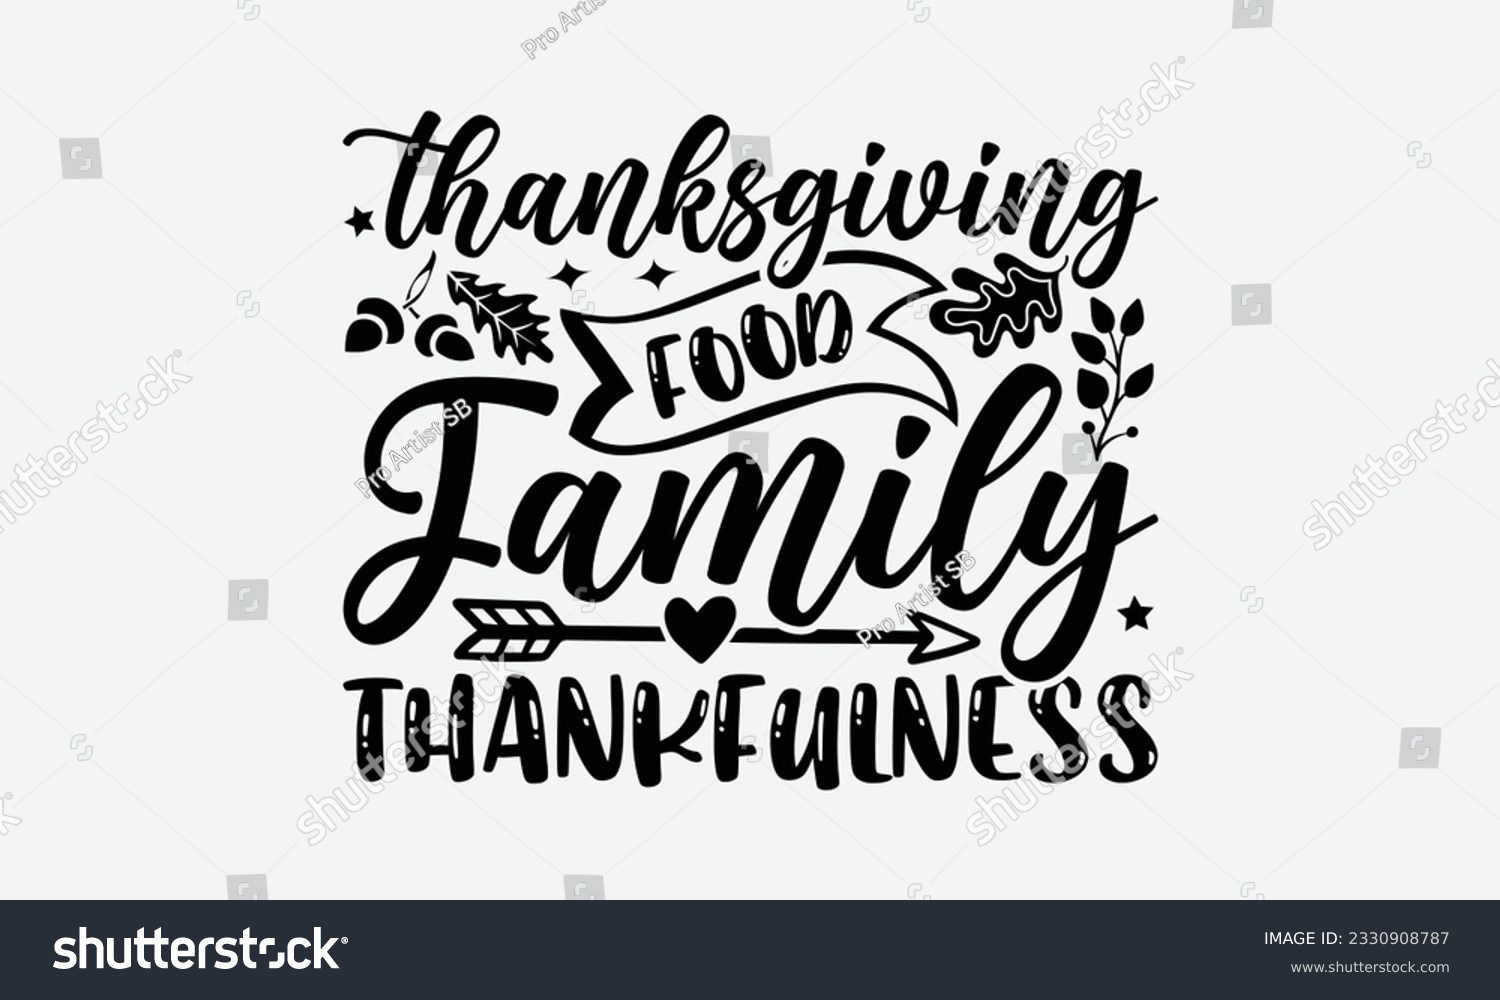 SVG of Thanksgiving Food Family Thankfulness - Thanksgiving T-shirt Design Template, Happy Turkey Day SVG Quotes, Hand Drawn Lettering Phrase Isolated On White Background. svg